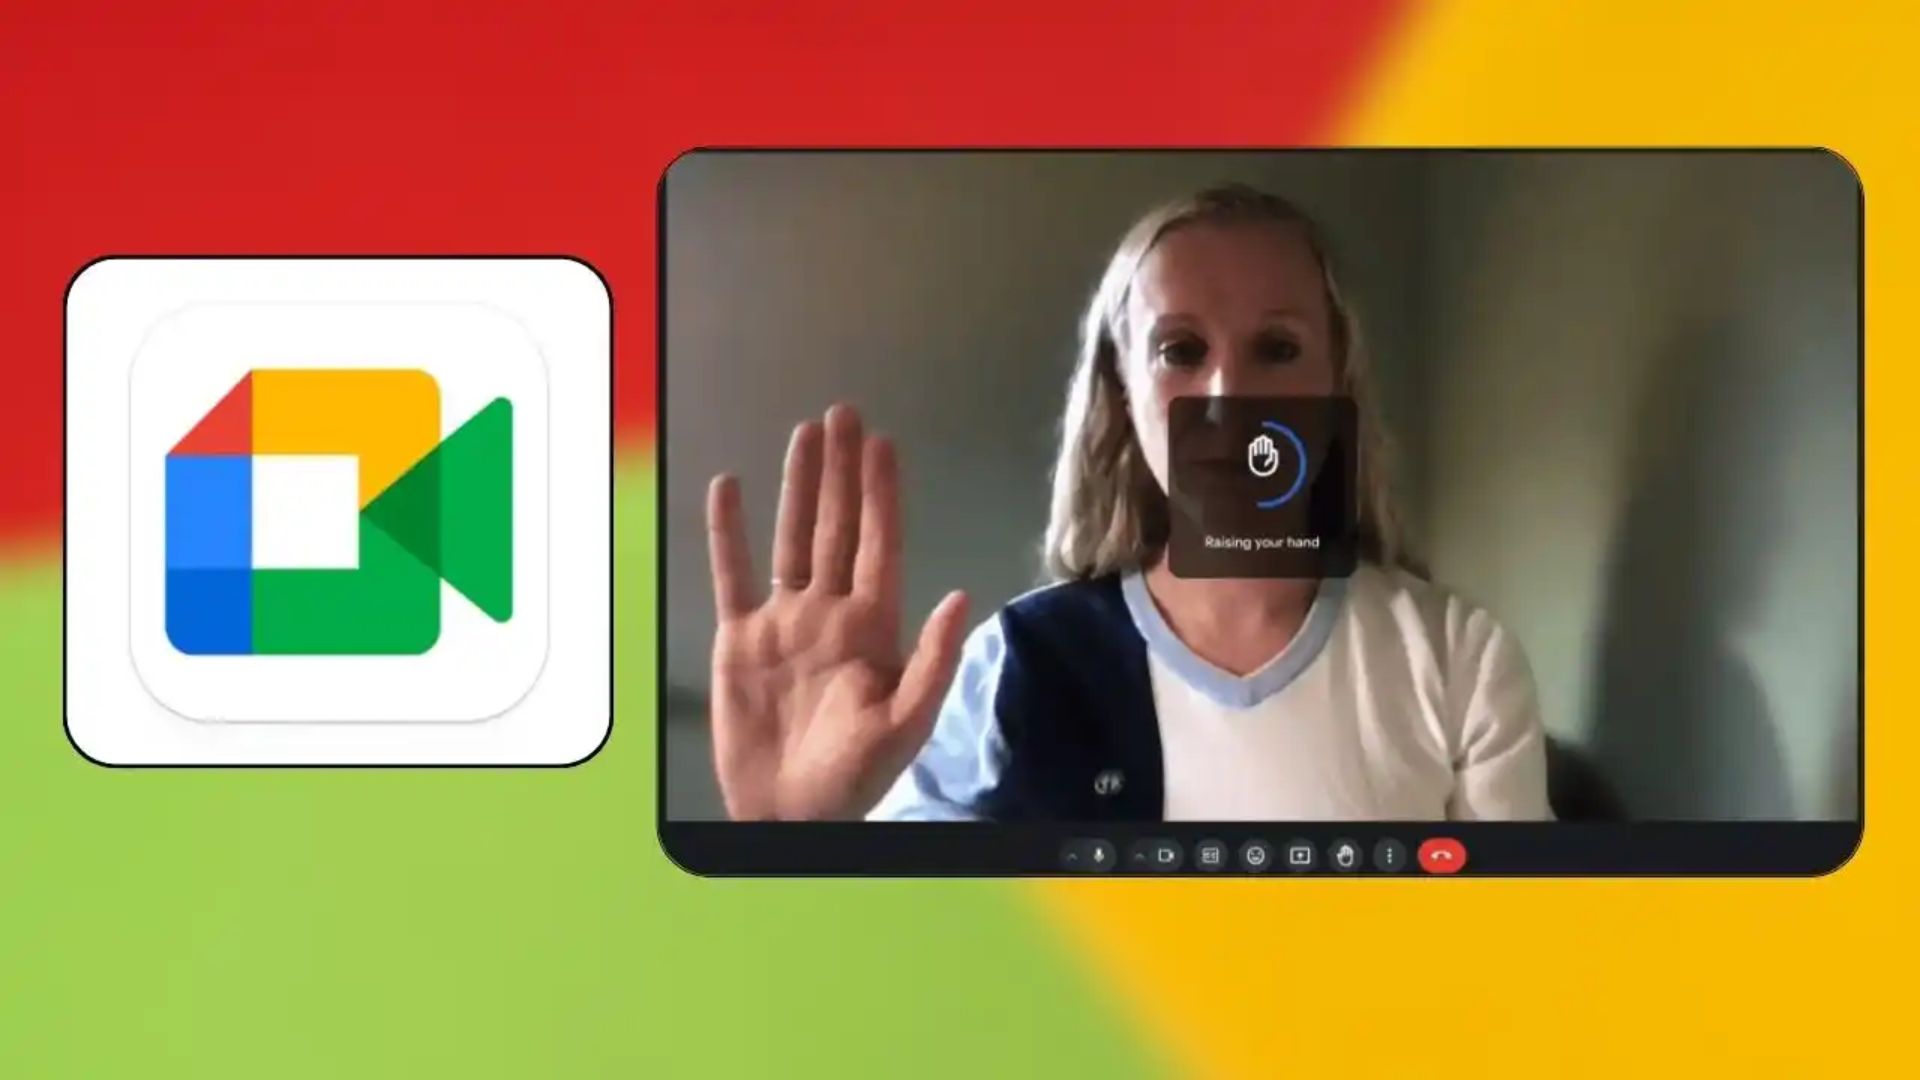 Quick Tips for Using Google Meet's Hand Raise Feature